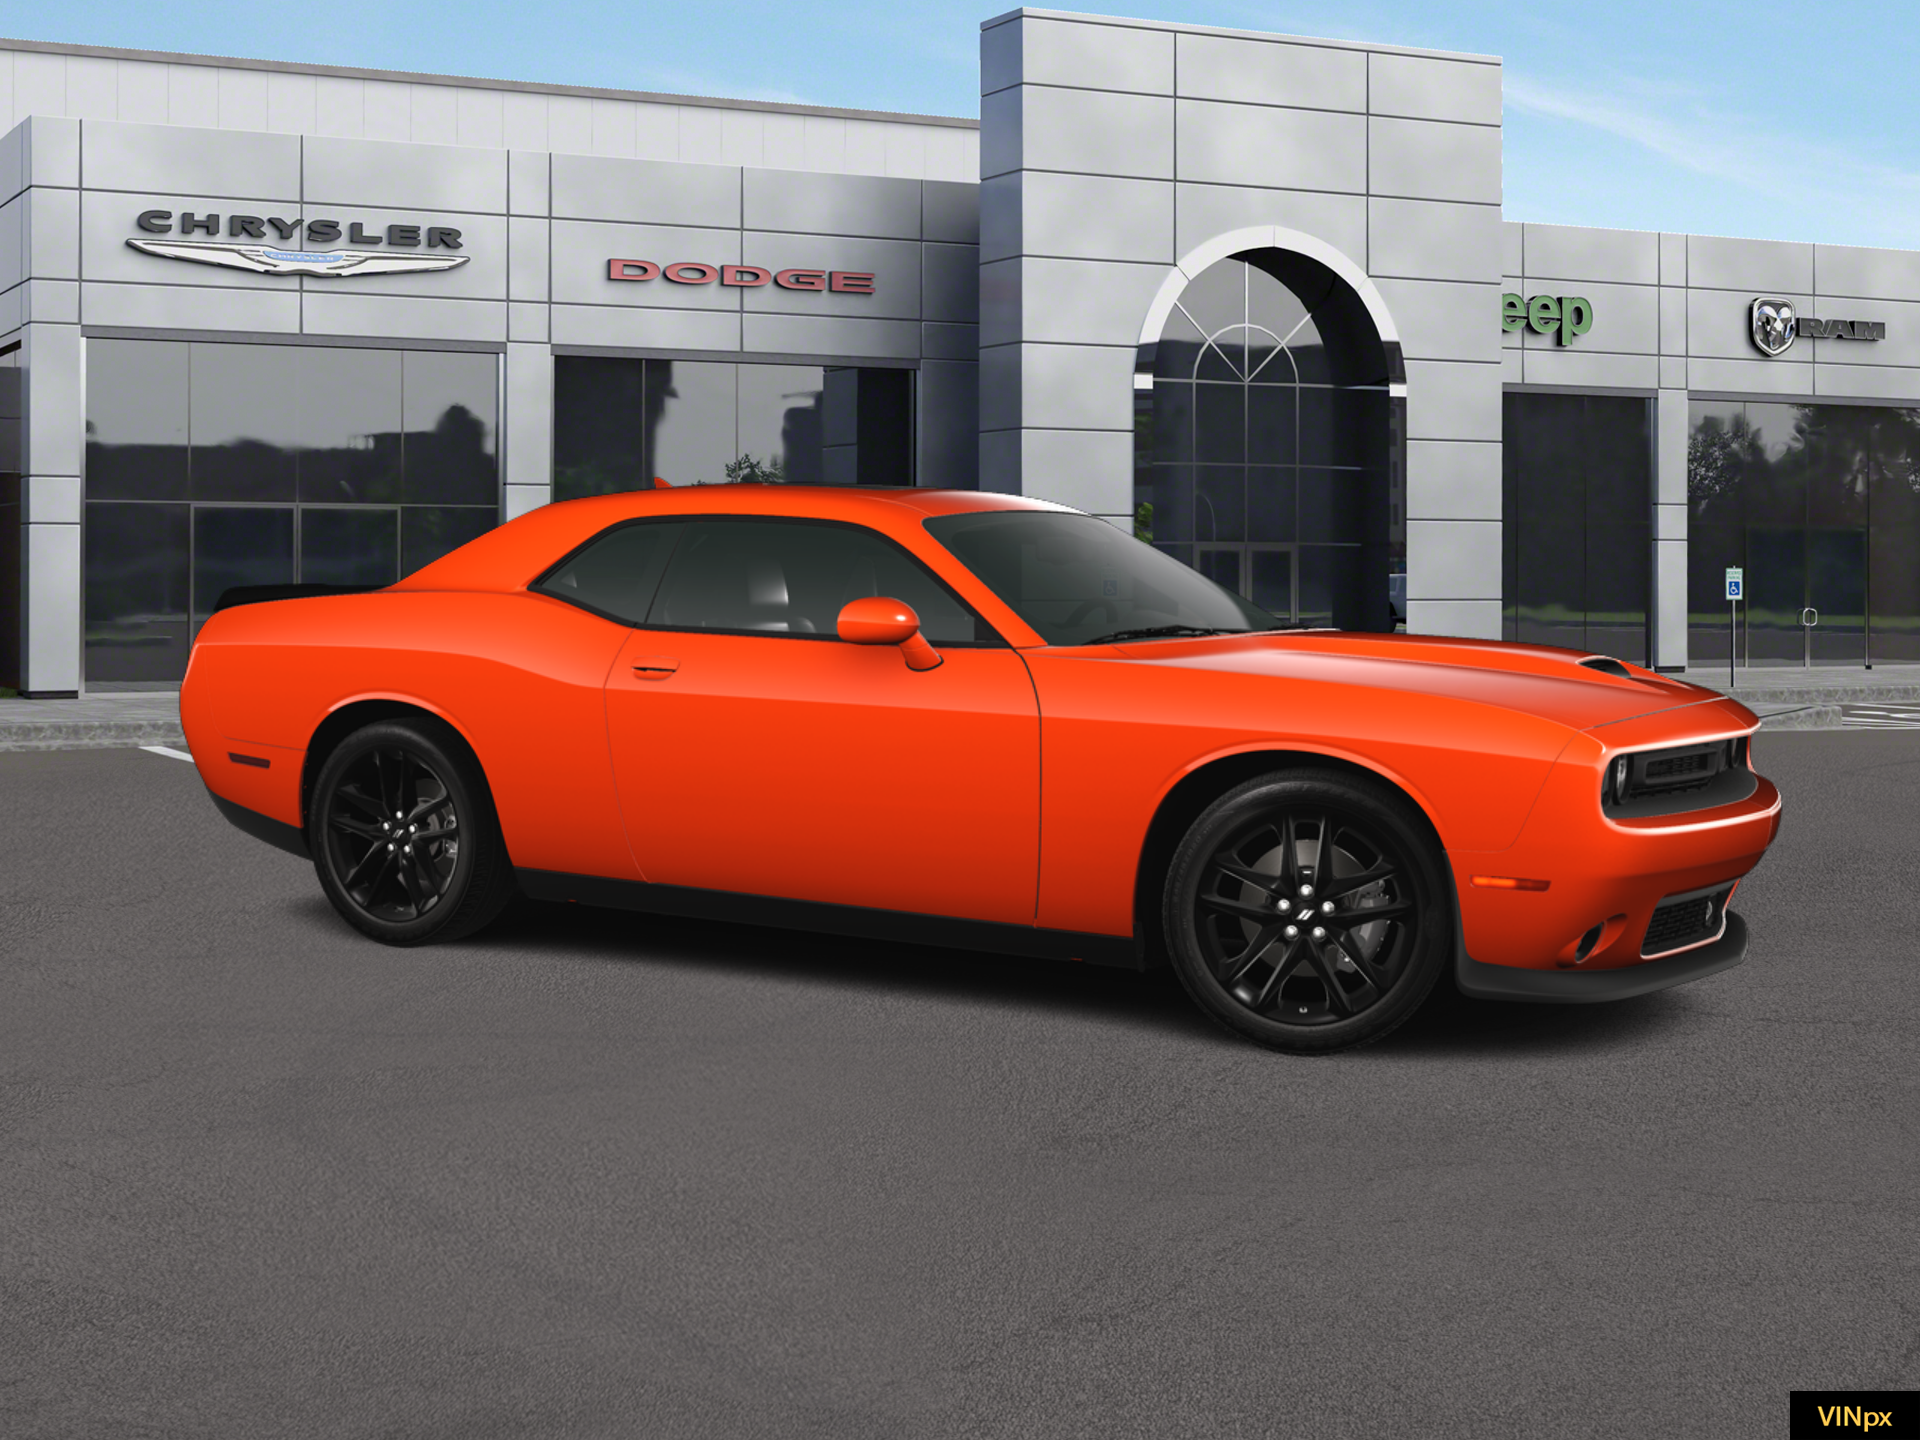 2023 Challenger Awd Concept